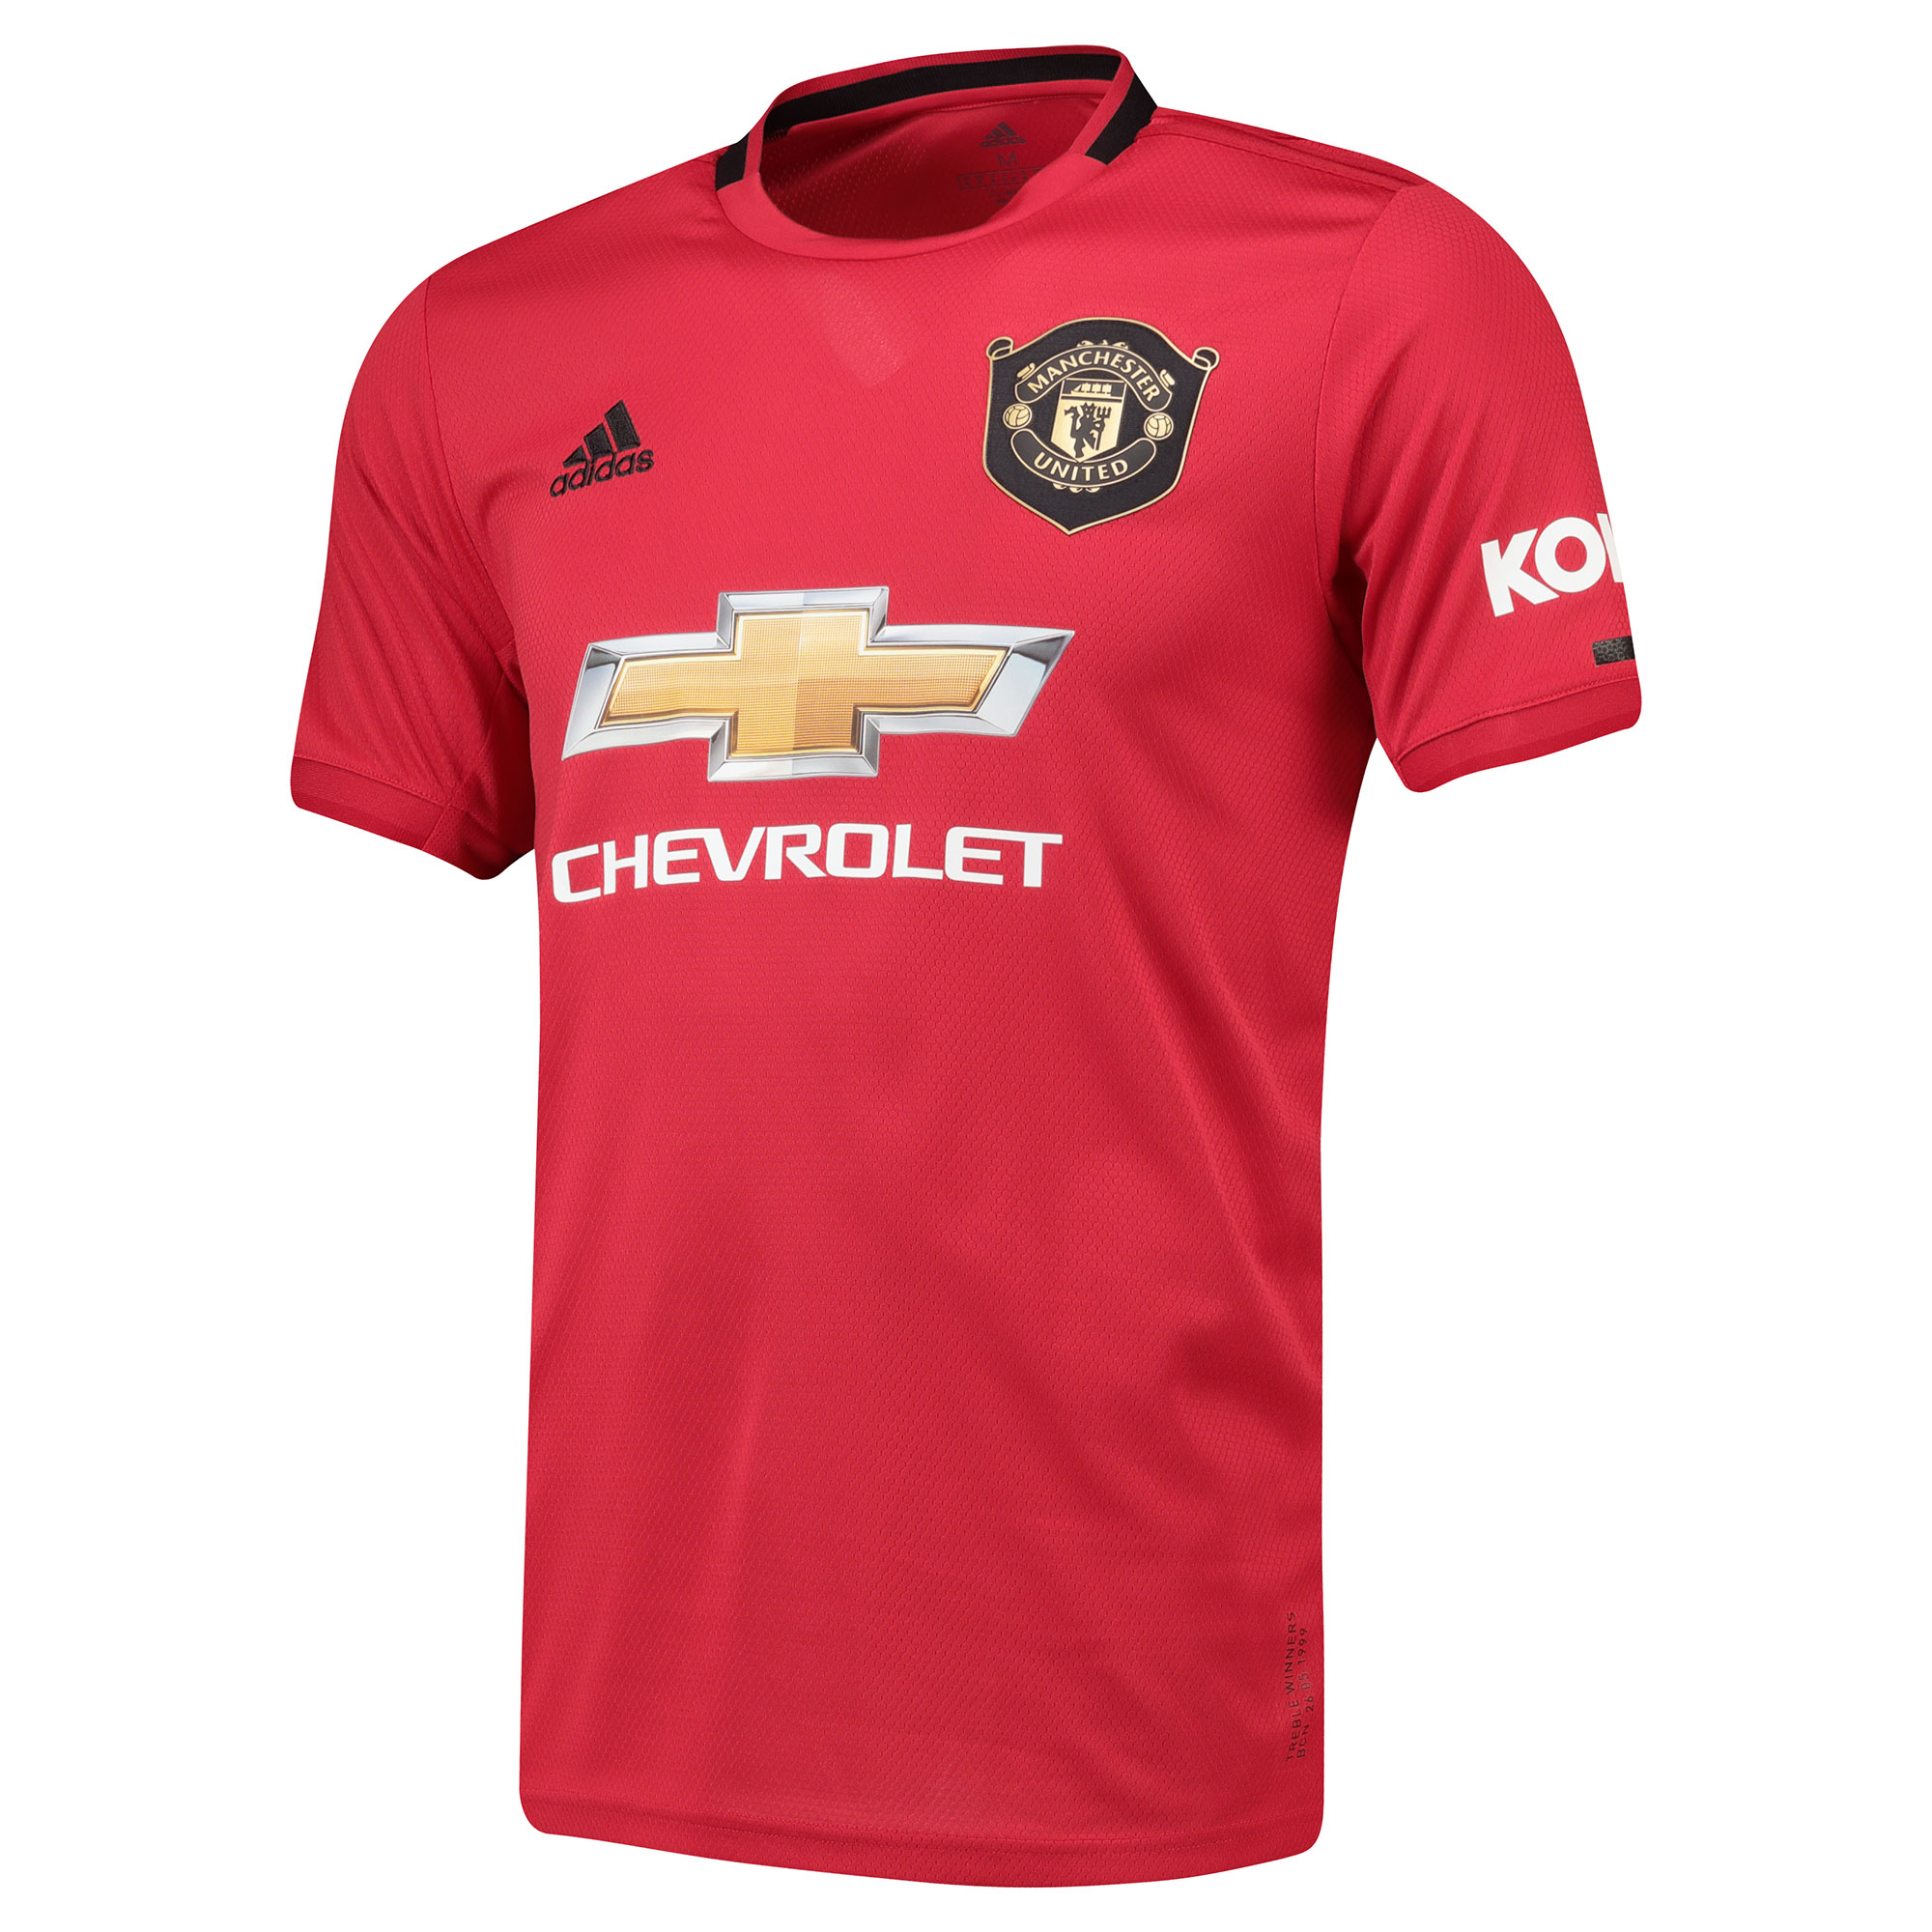 real manchester united jersey